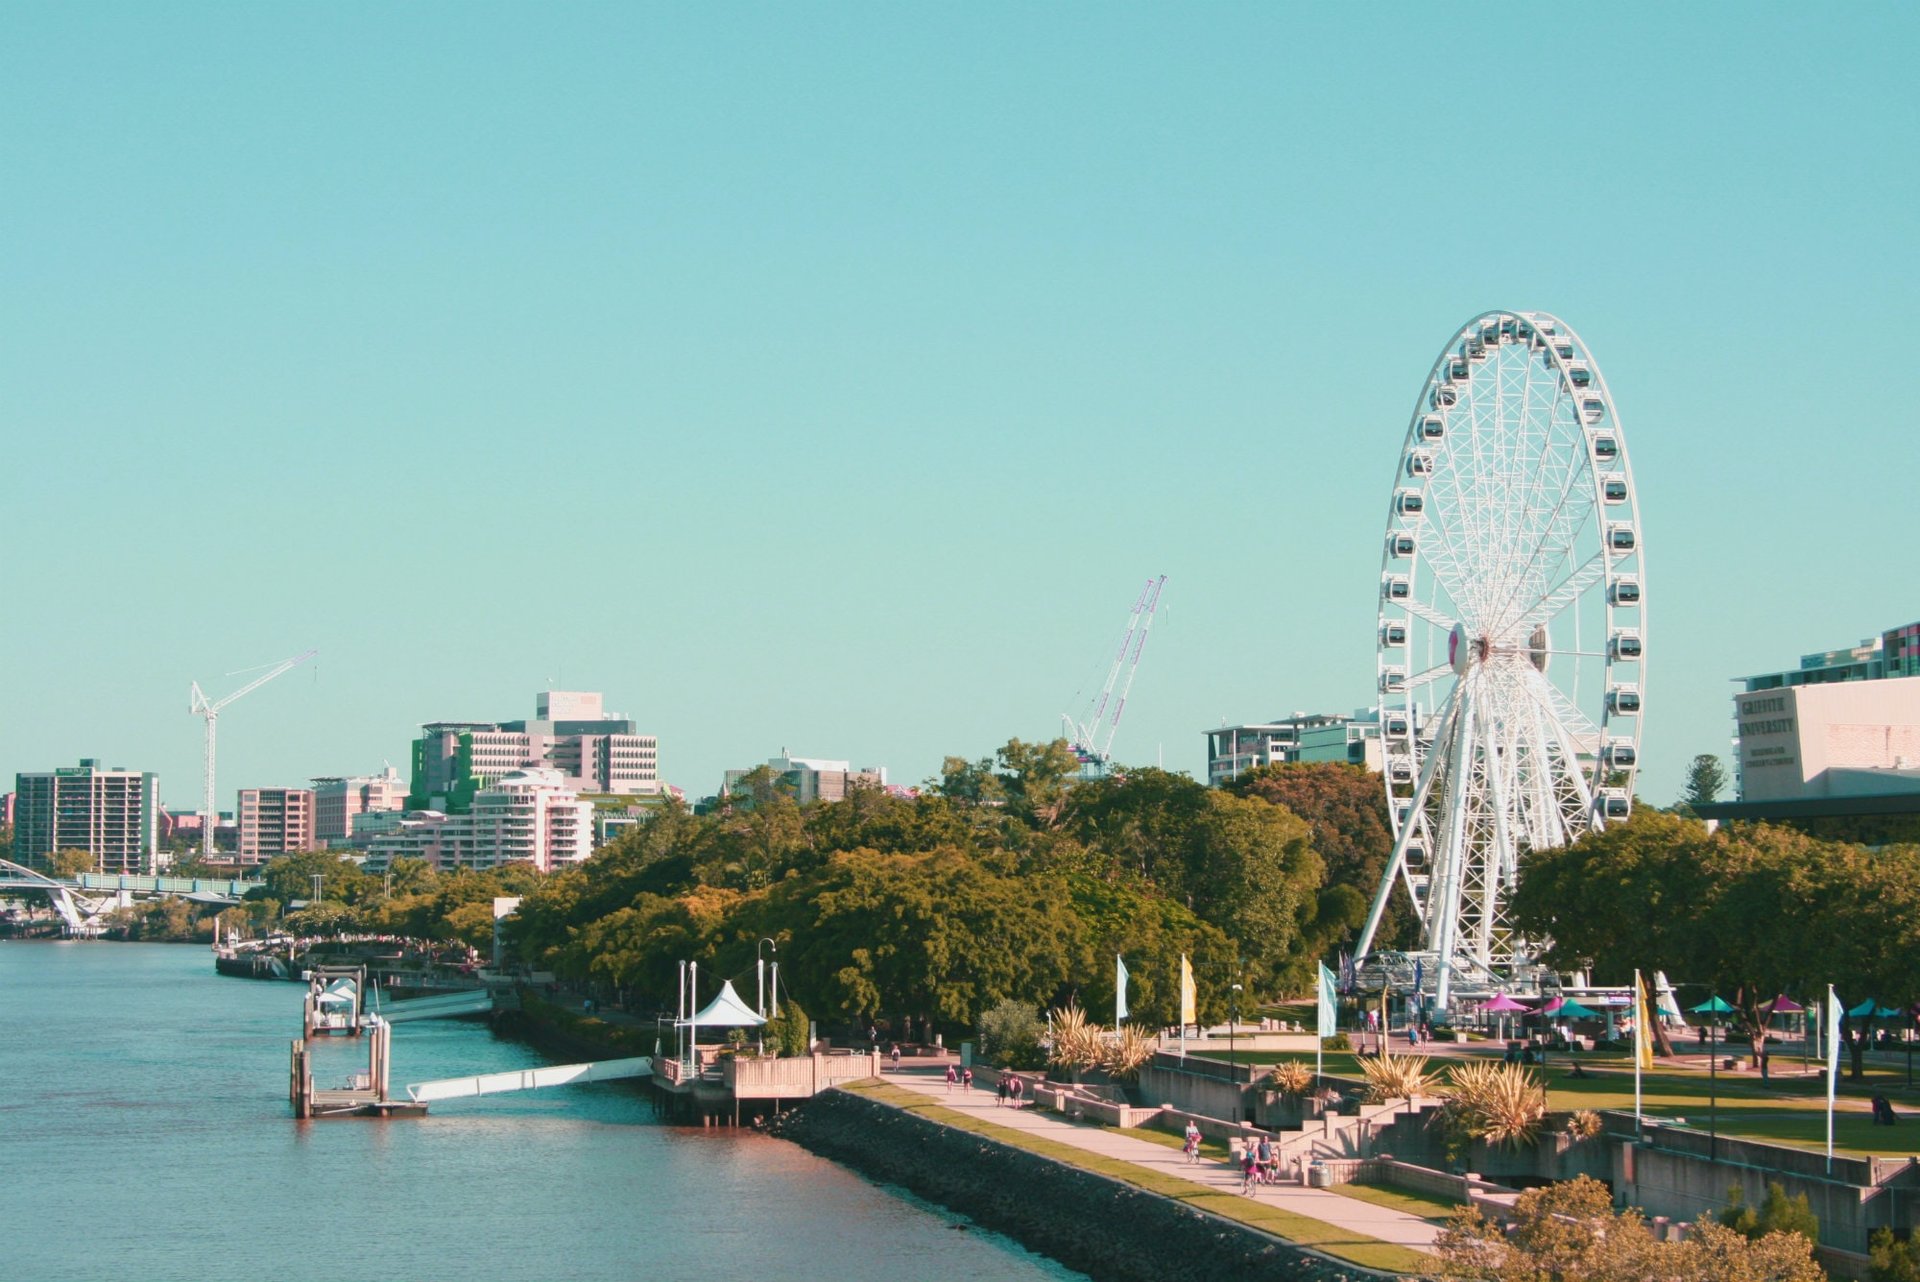 5 days of arts and culture around Brisbane and the Gold Coast